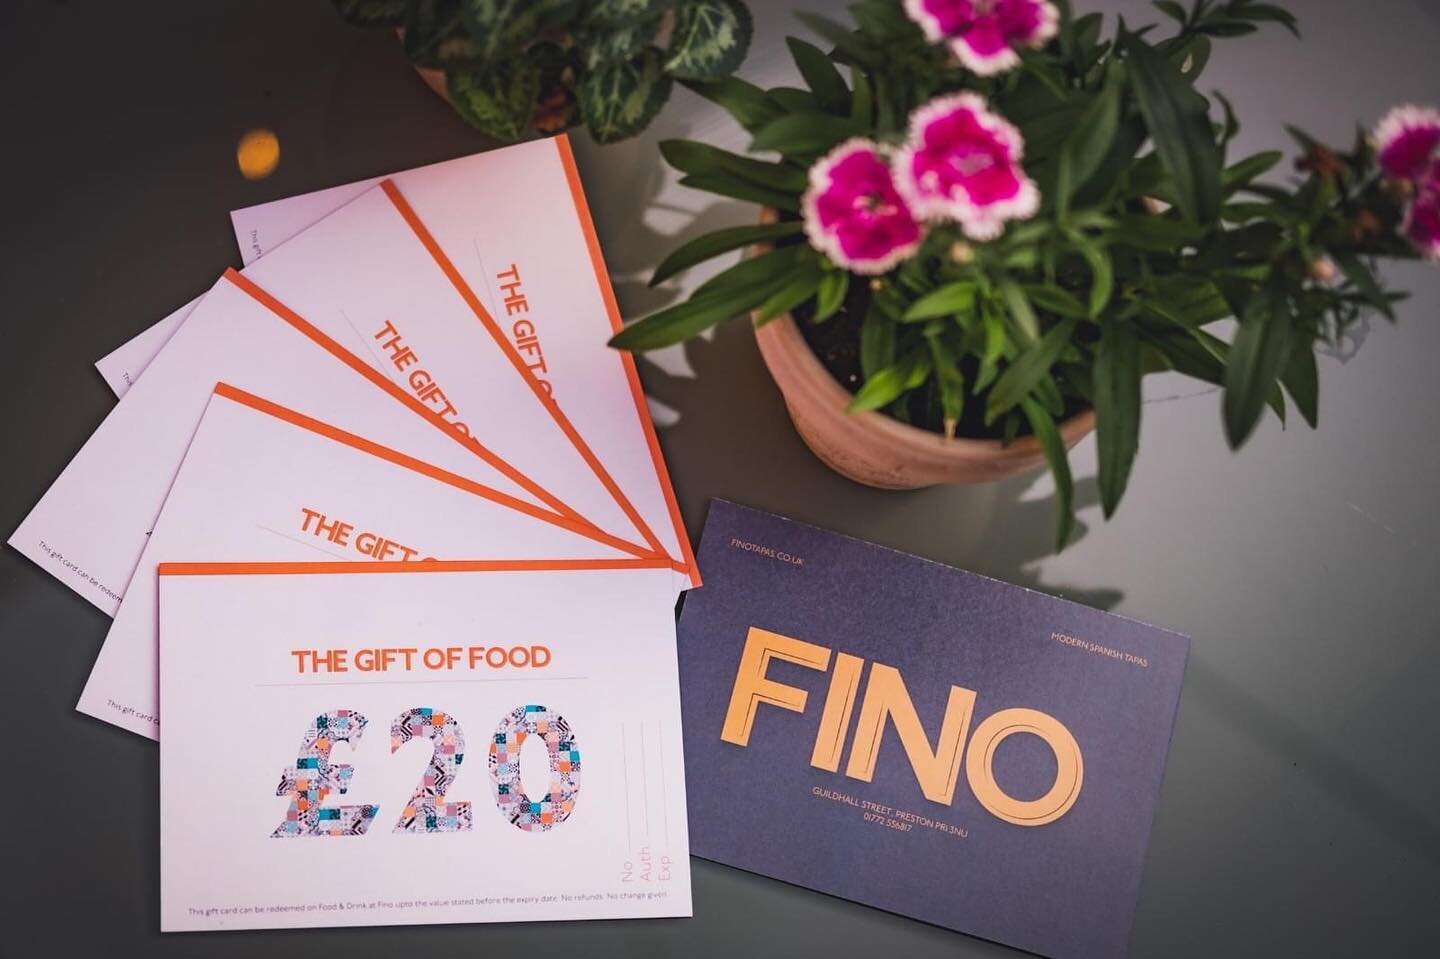 The perfect gift? Food! 

Did you know you can buy our gift cards online? 

You can collect them from us or we can post them to you! Just select your preferred method at check out. 

www.finotapas.co.uk/gift-cards (link to website in bio @finotapas)